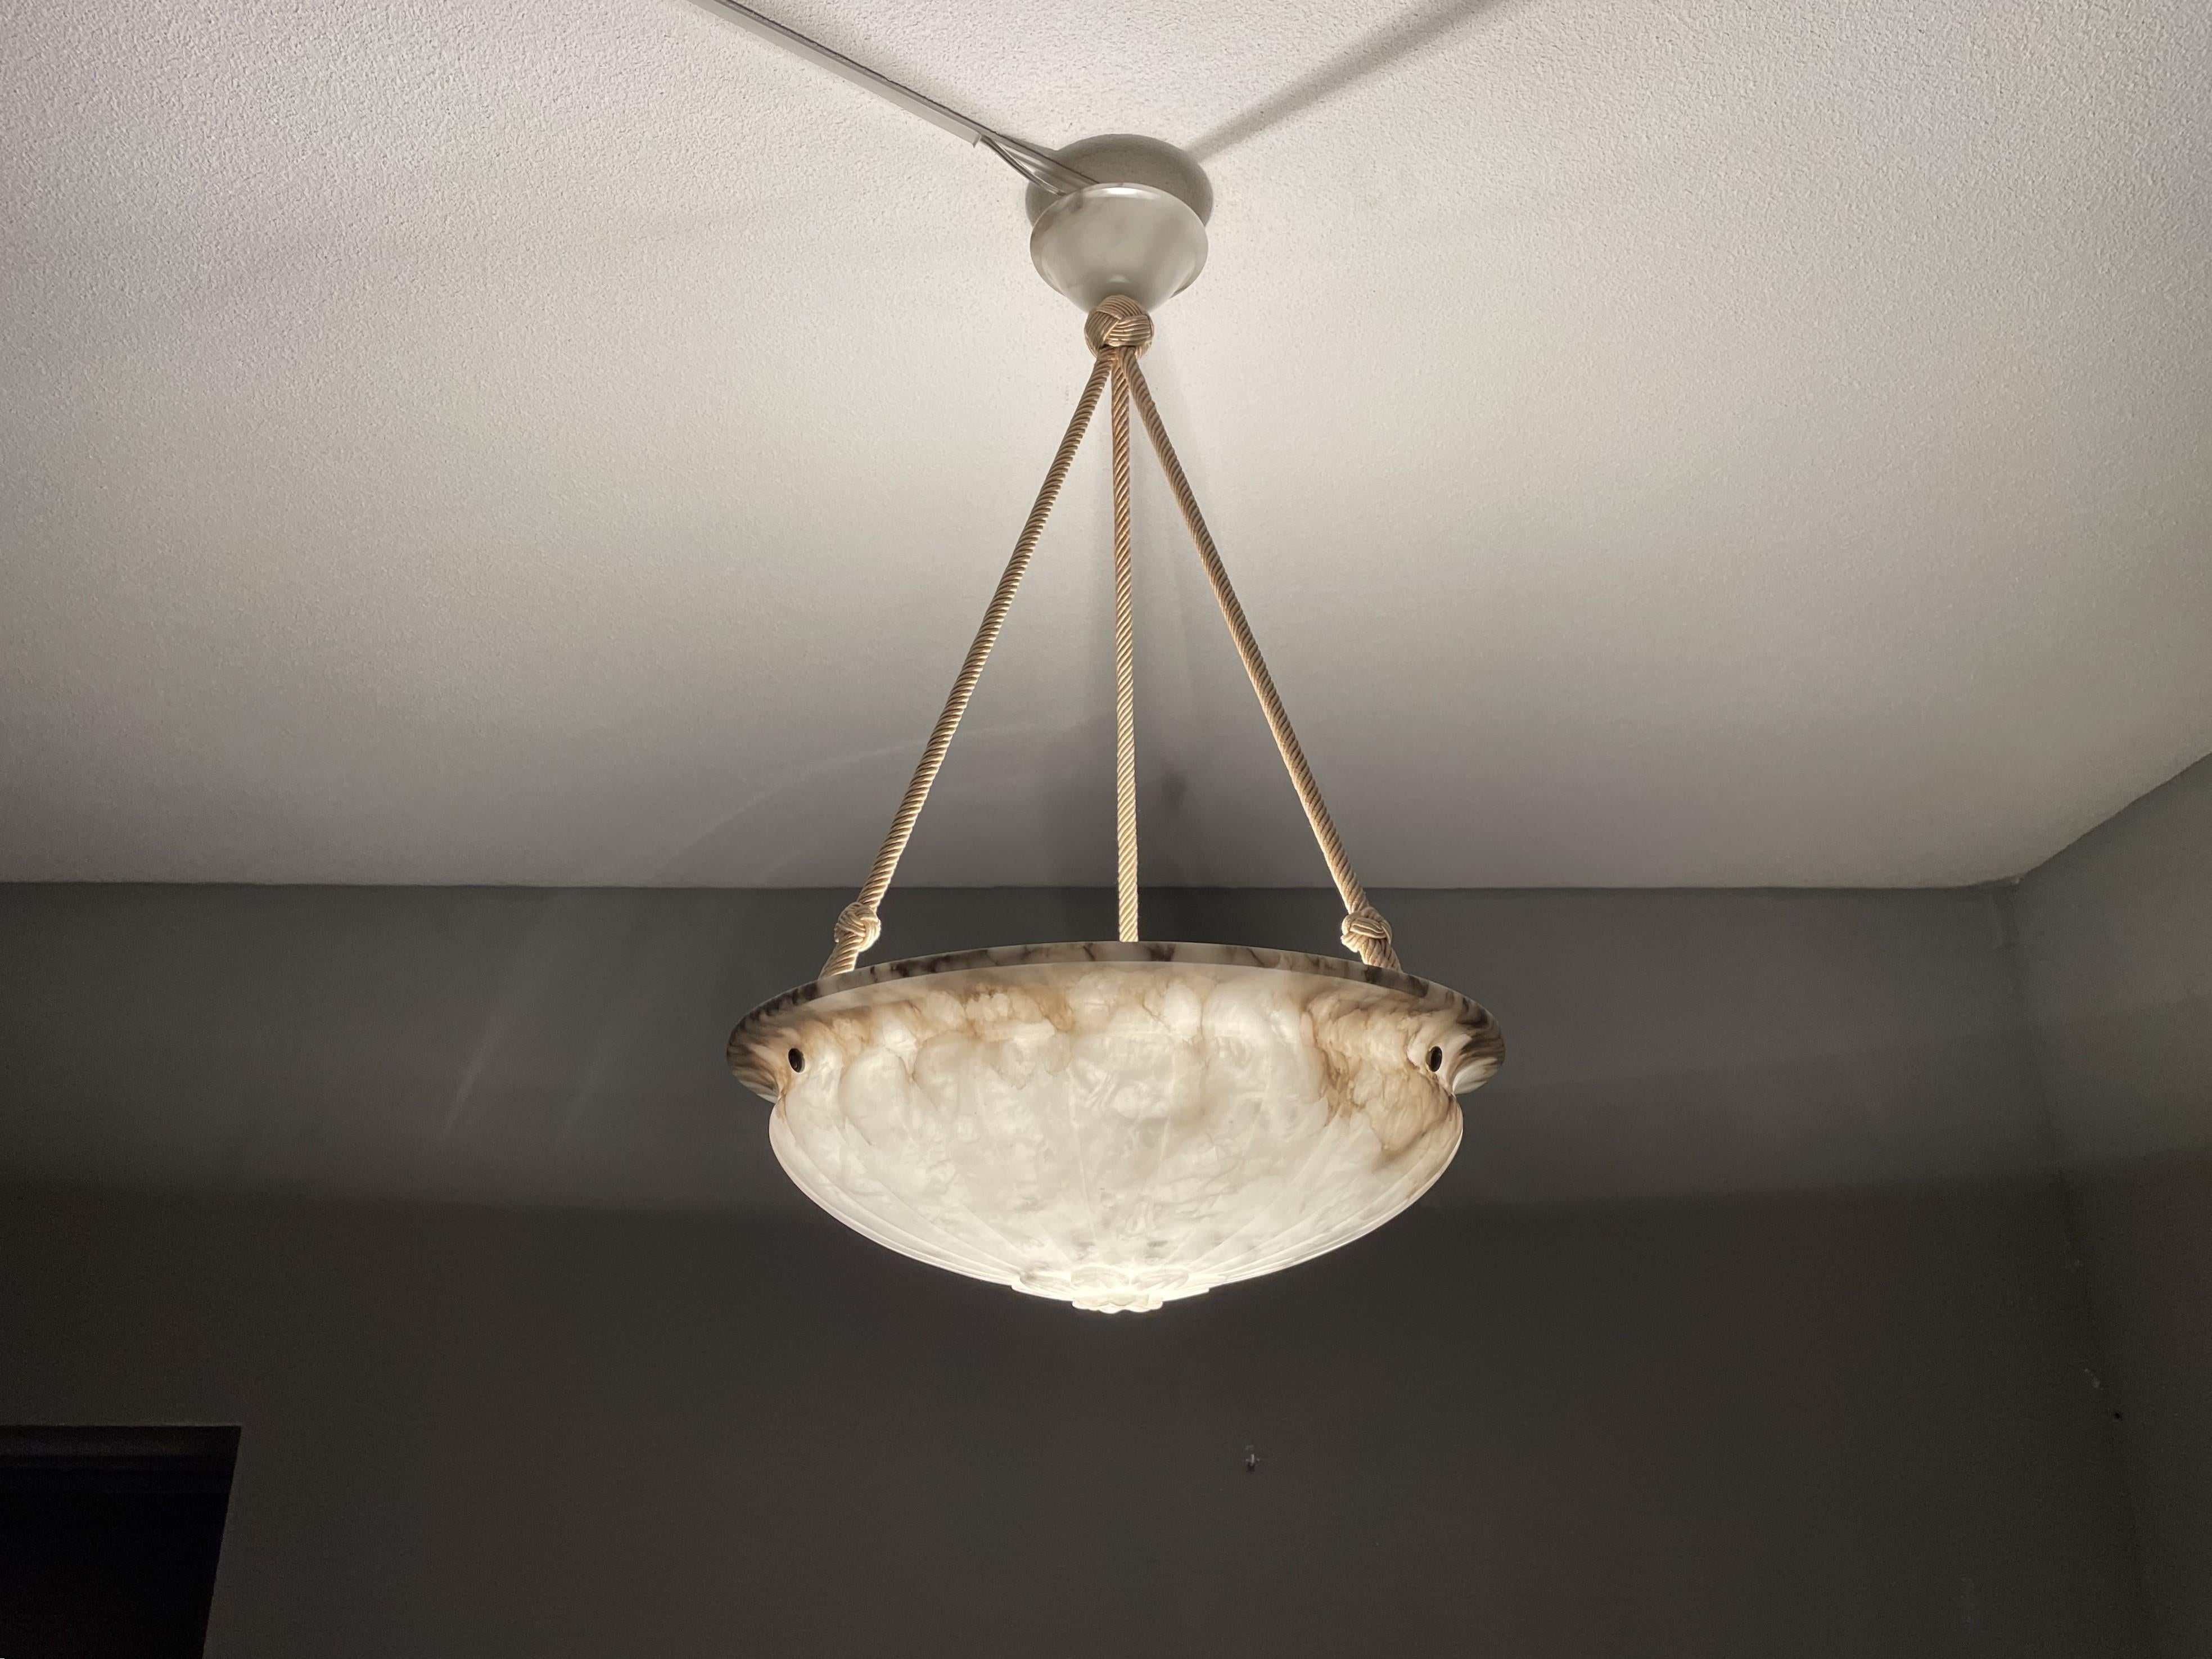 Exceptional antique alabaster chandelier for an entry hall, bedroom or any other room.

With these alabaster pendants being one of our specialities, we always enjoy finding the best of the best and this amazing specimen totally fits that bill. So if